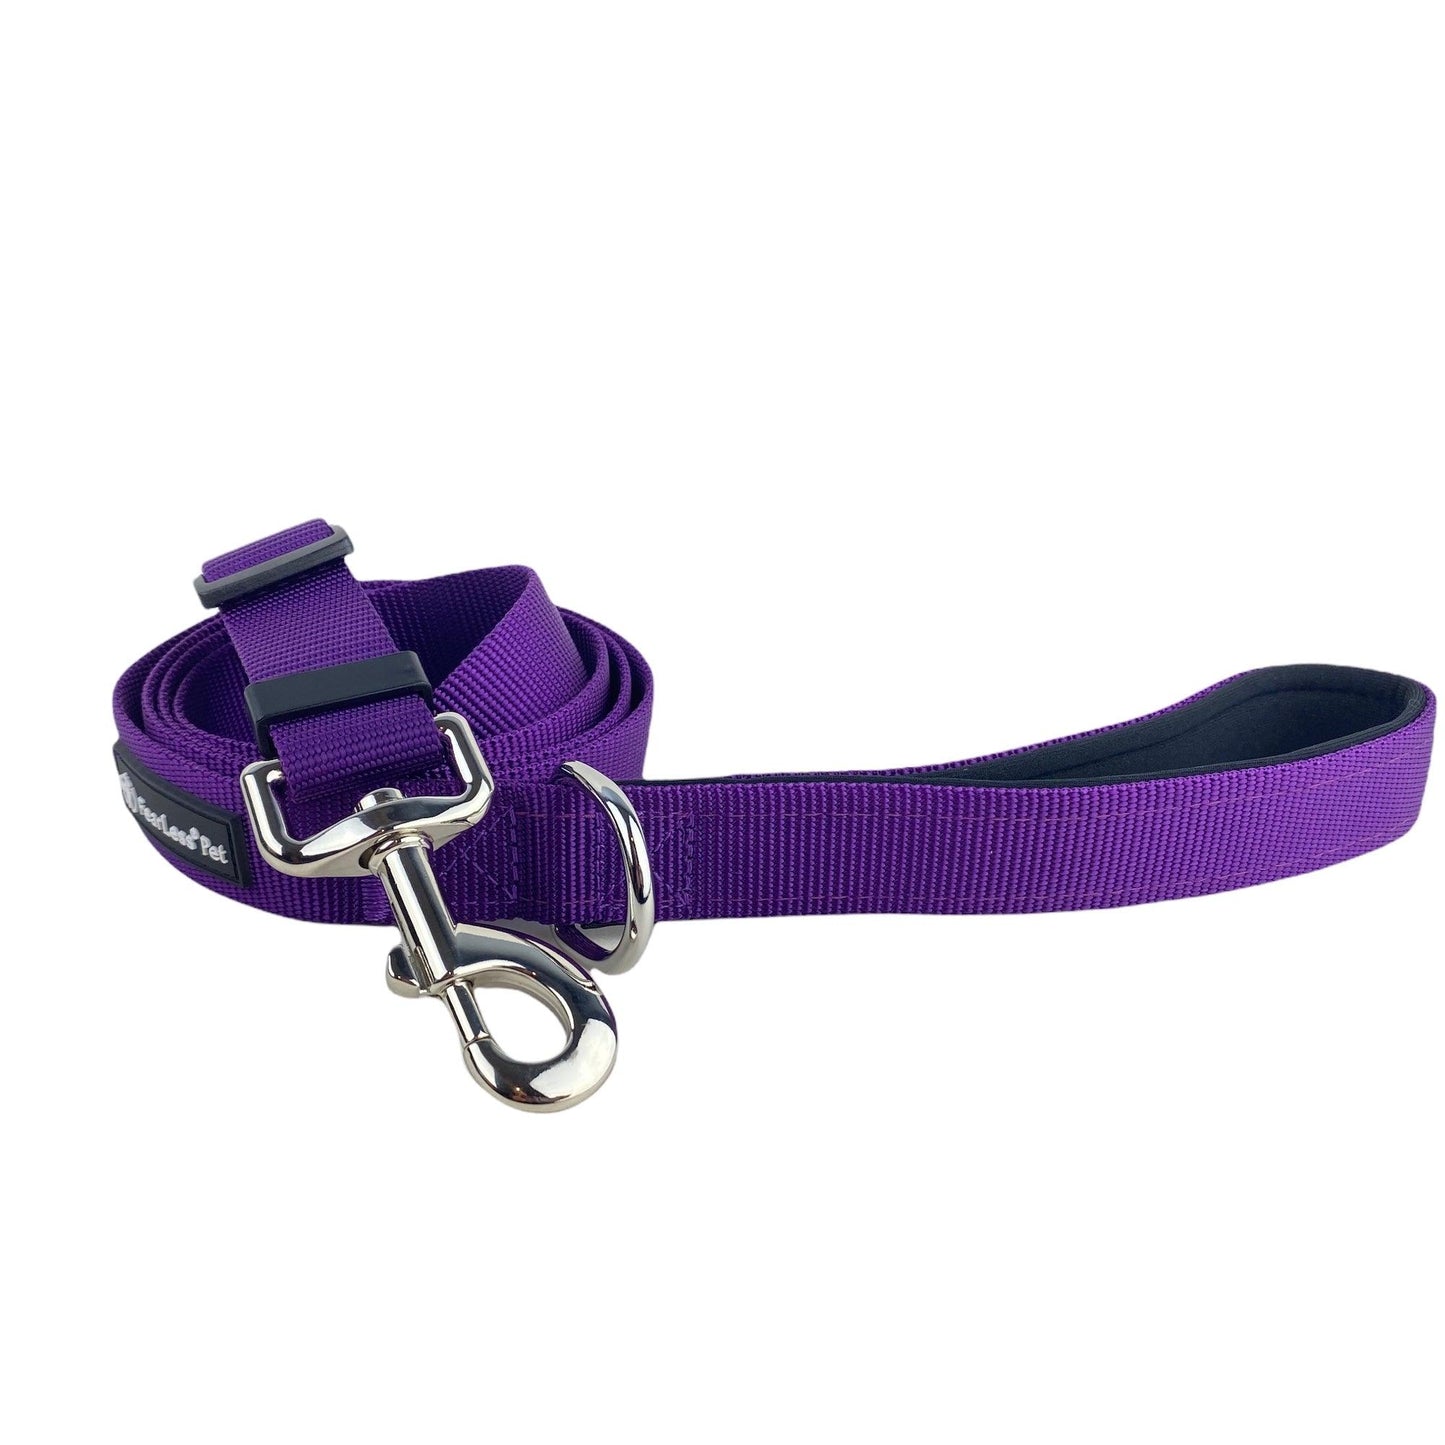 Adjustable Dog Leash 3-5.5 ft with Padded Handle - Purple - FearLess Pet